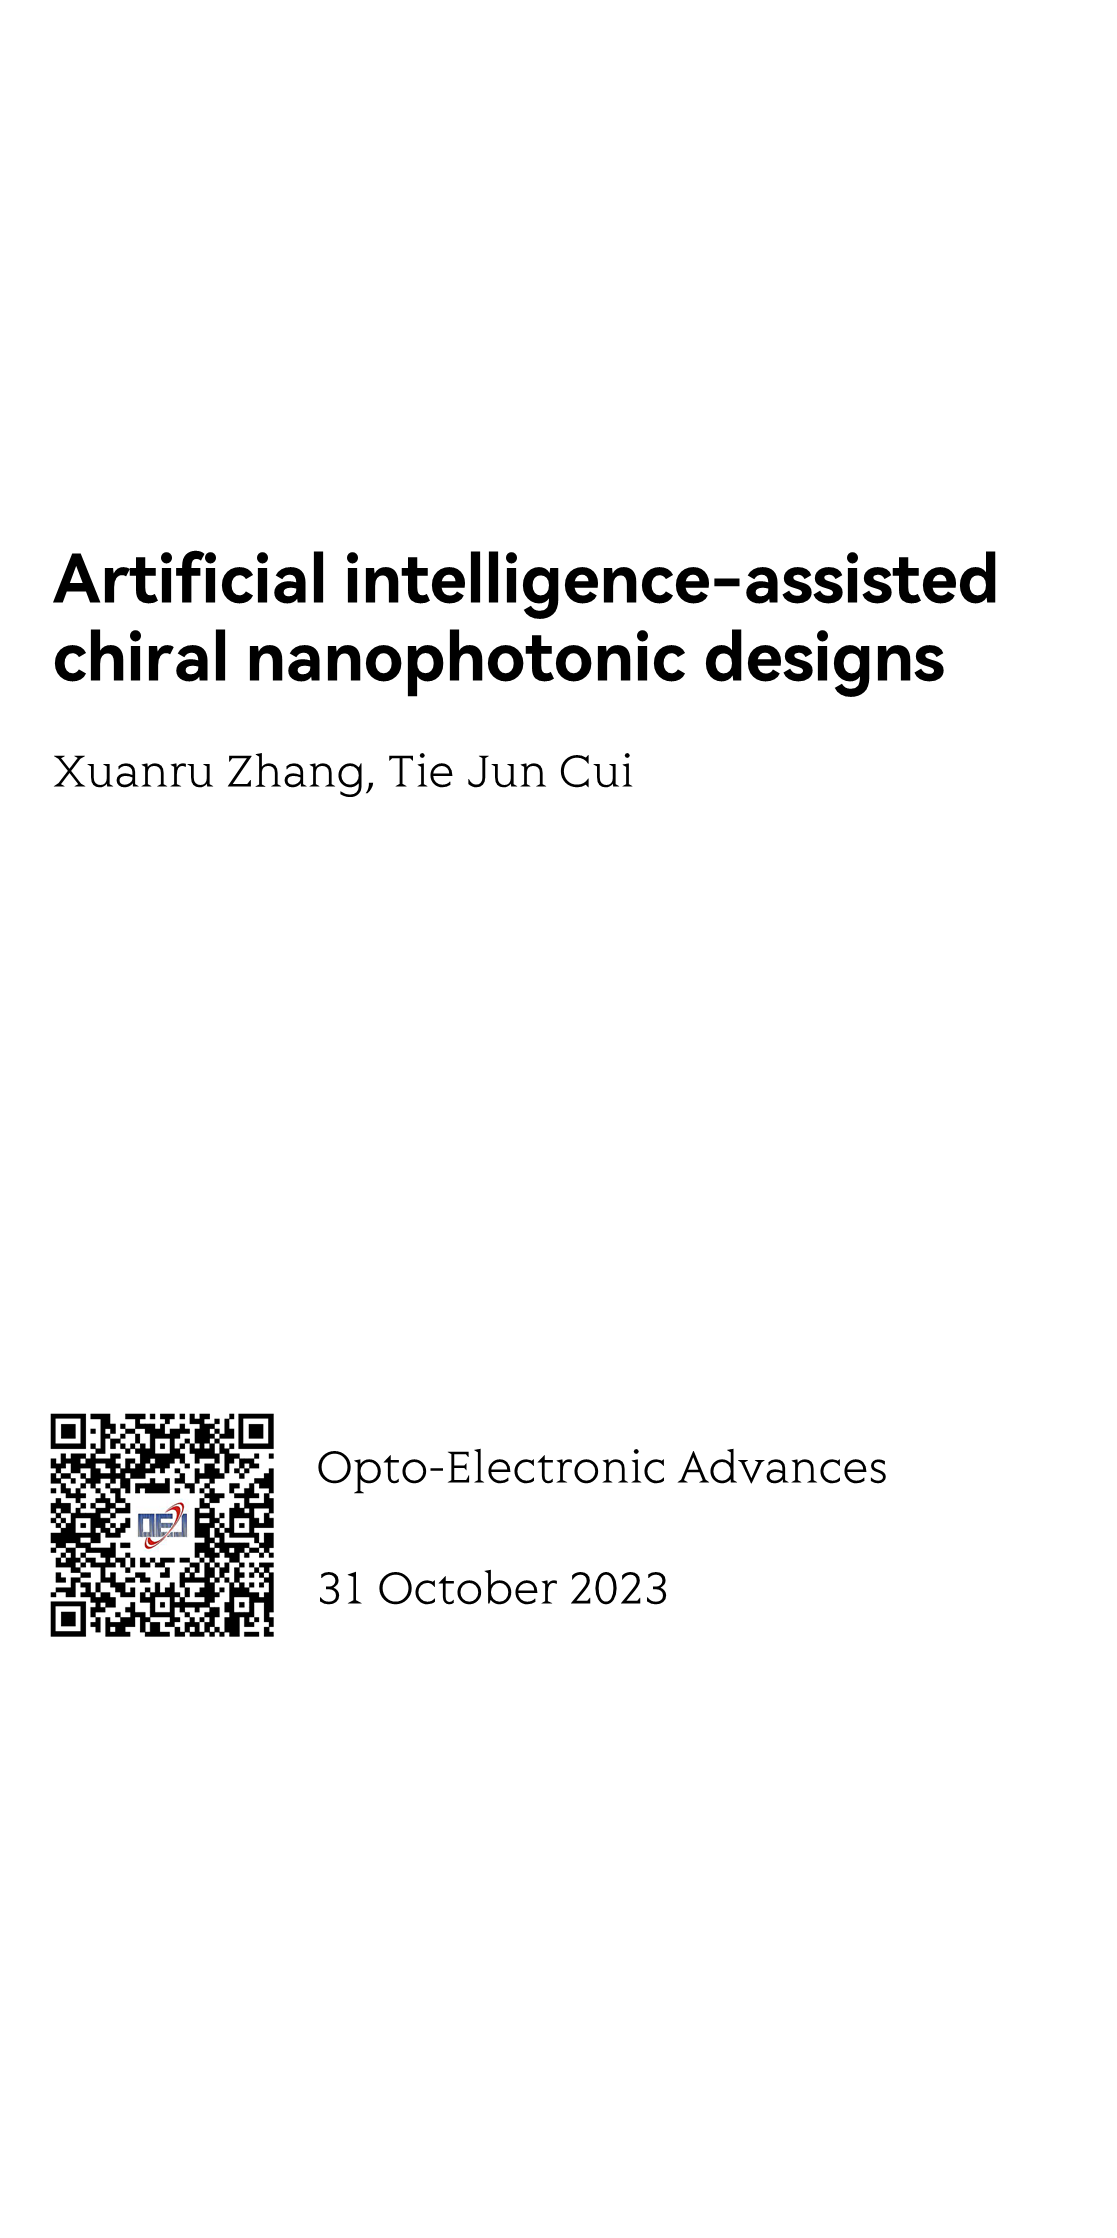 Artificial intelligence-assisted chiral nanophotonic designs_1